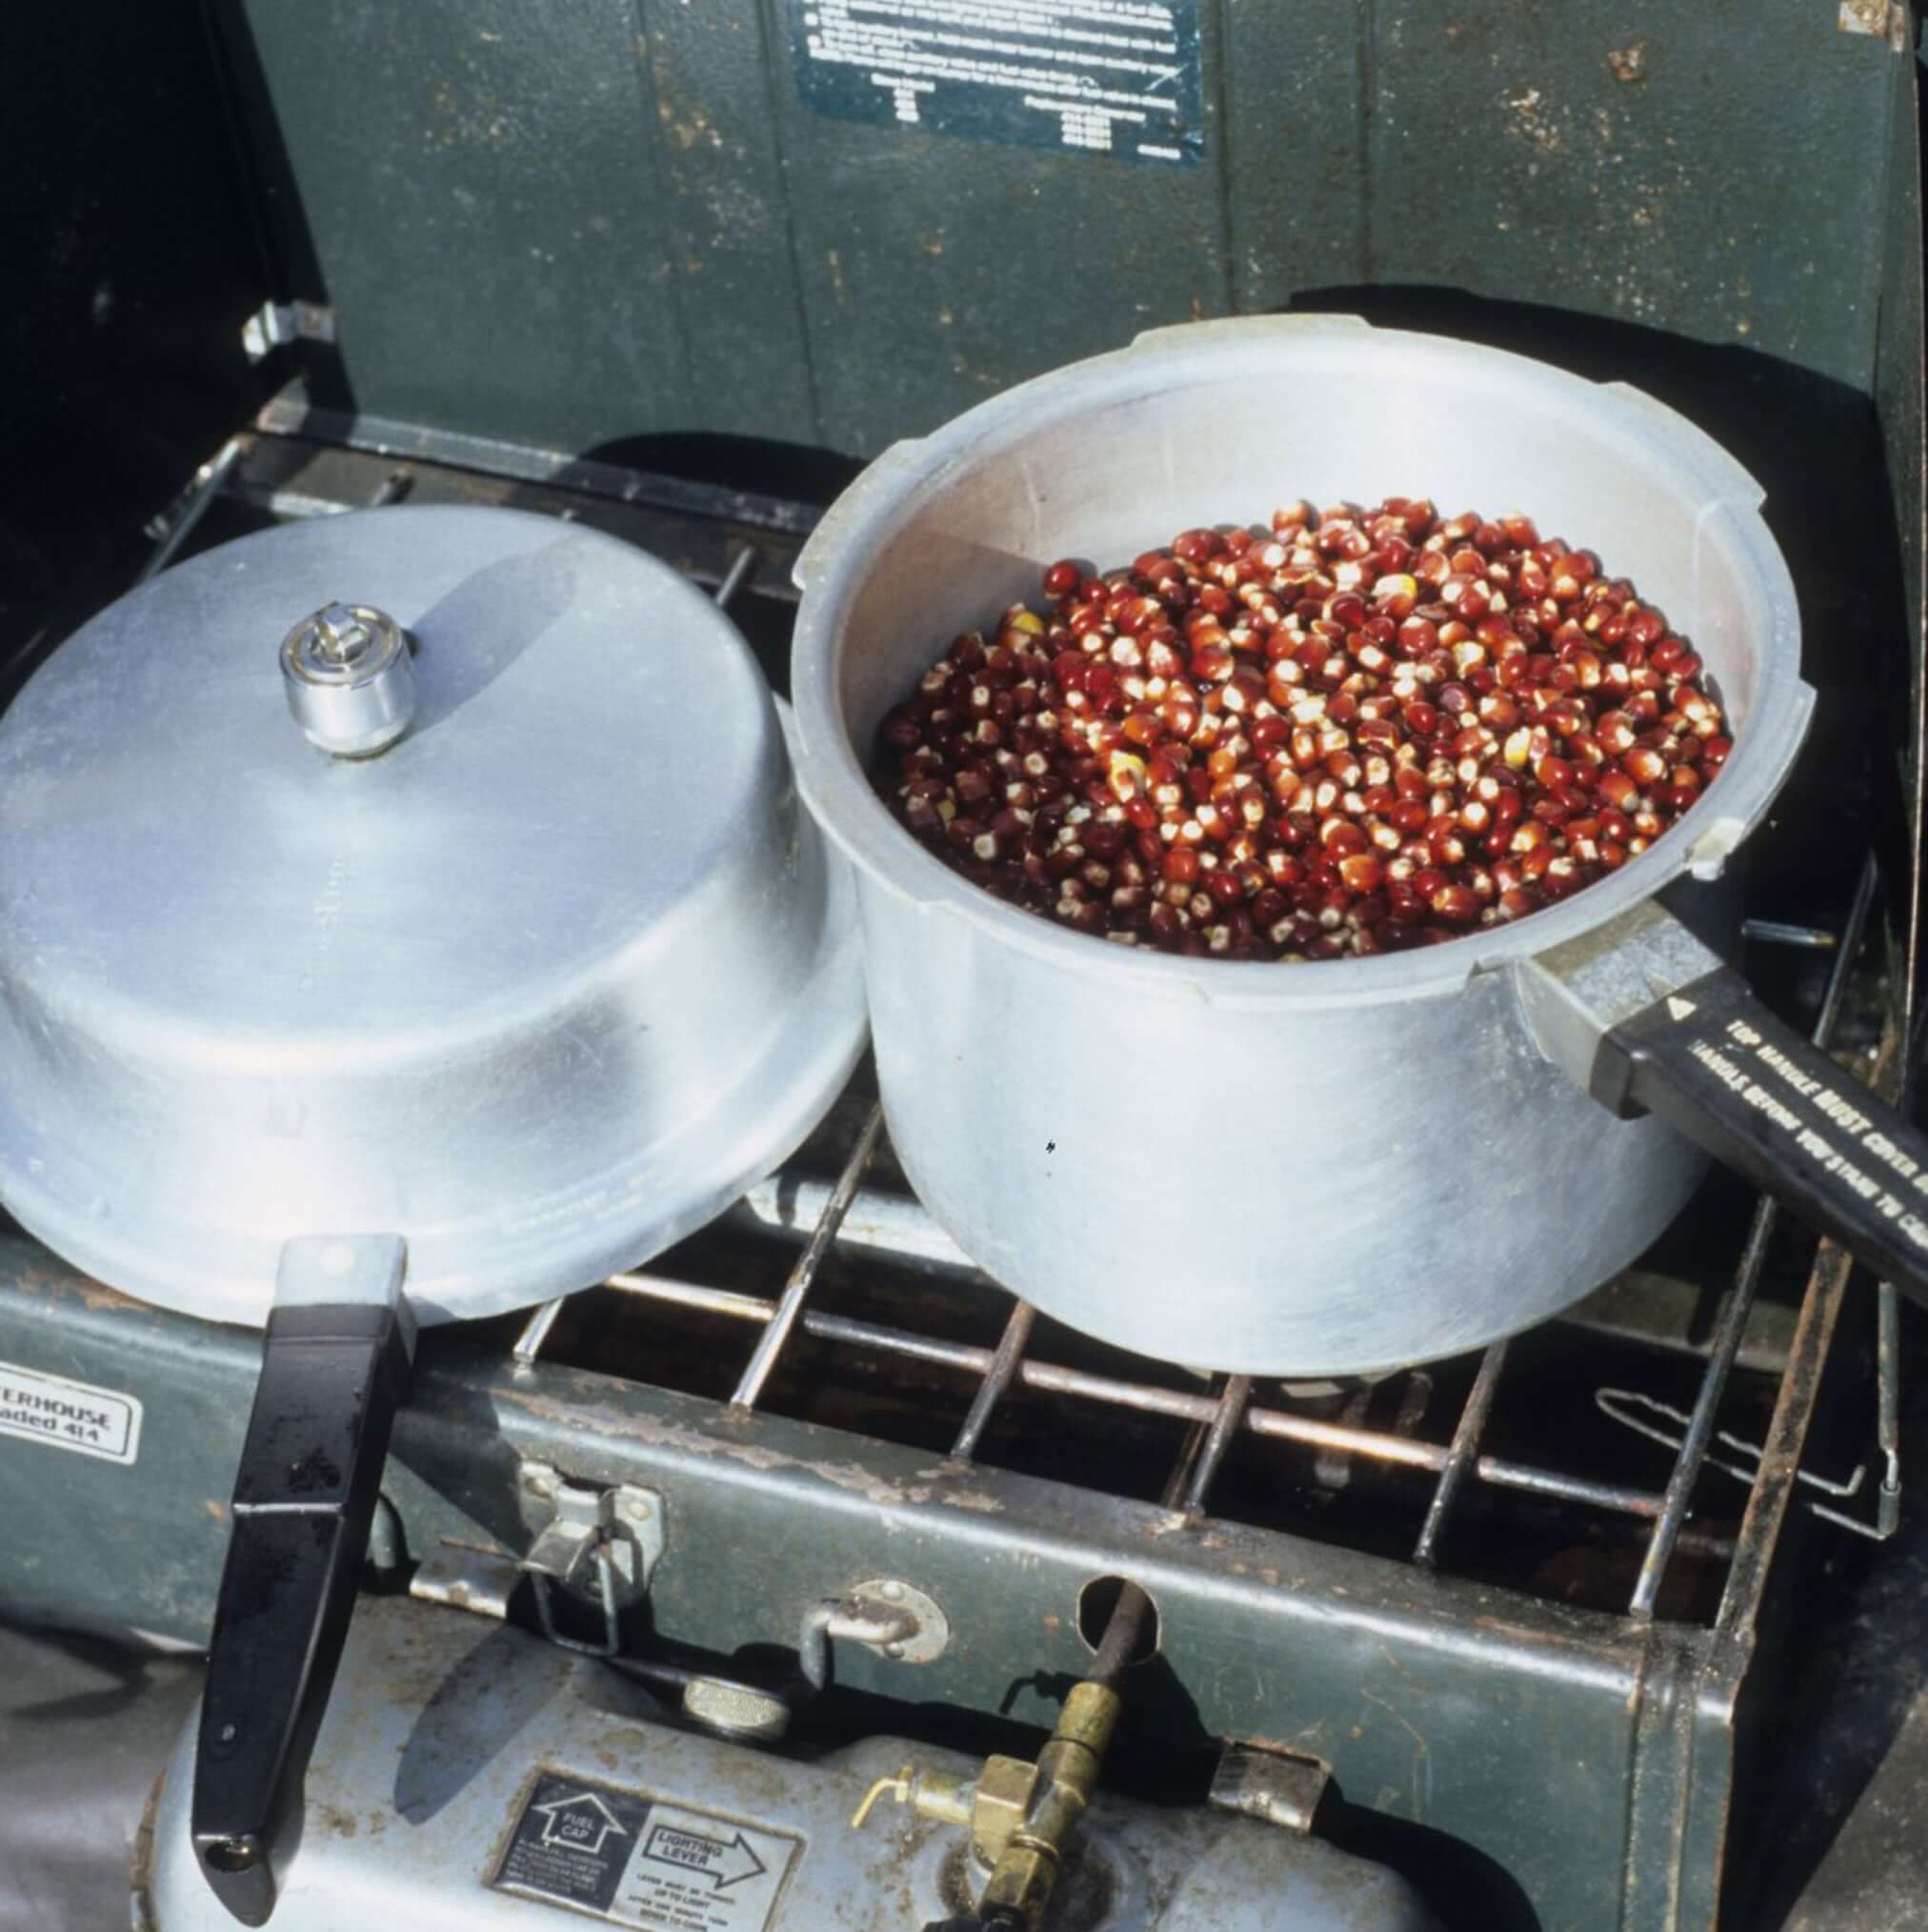 Another way to prepare maize is in a pressure-cooker